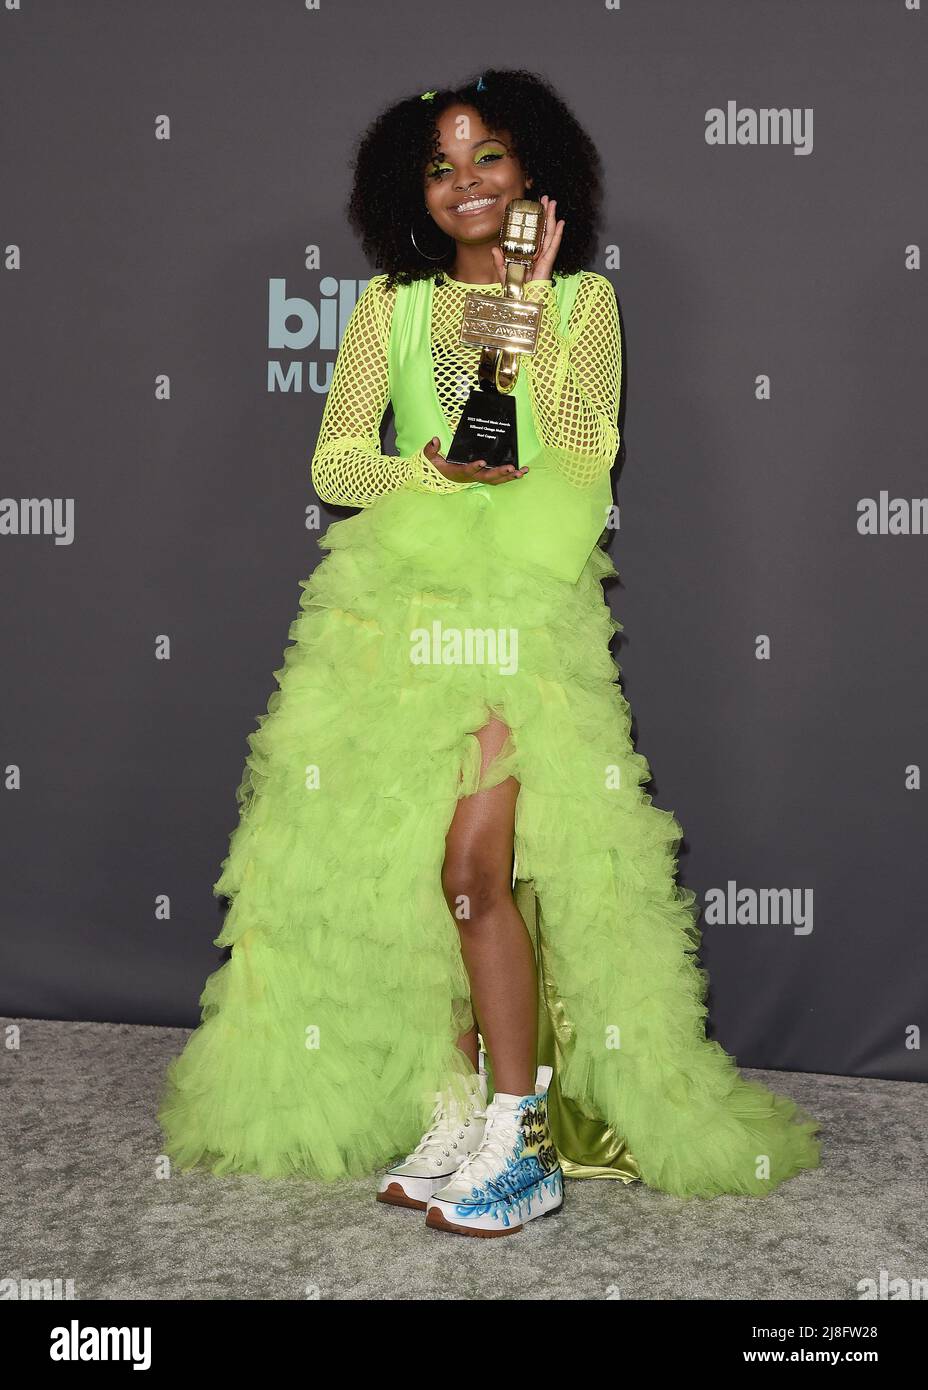 Mari Copeny in the press room at the 2022 Billboard Music Awards at MGM Grand Garden Arena in Las Vegas, NV on May 15, 2022. (Photo By Scott Kirkland/Sipa USA) Stock Photo